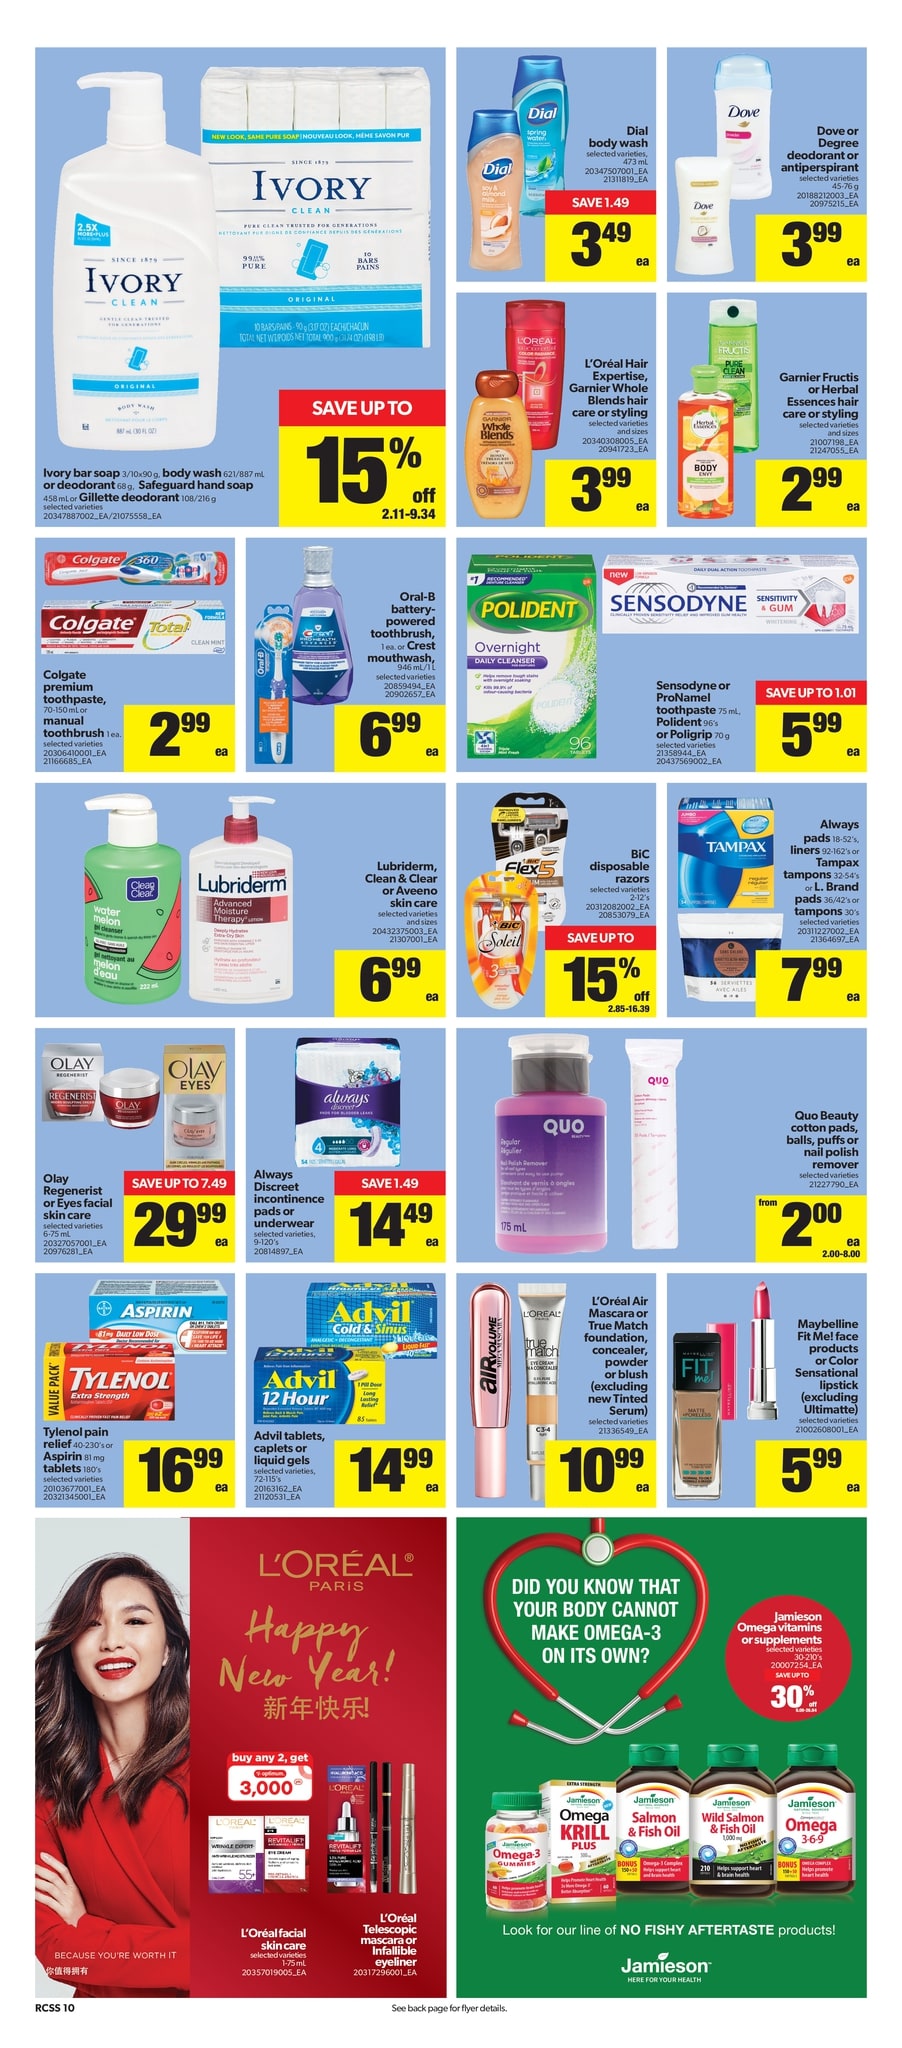 Real Canadian Superstore Ontario - Weekly Flyer Specials - Page 10